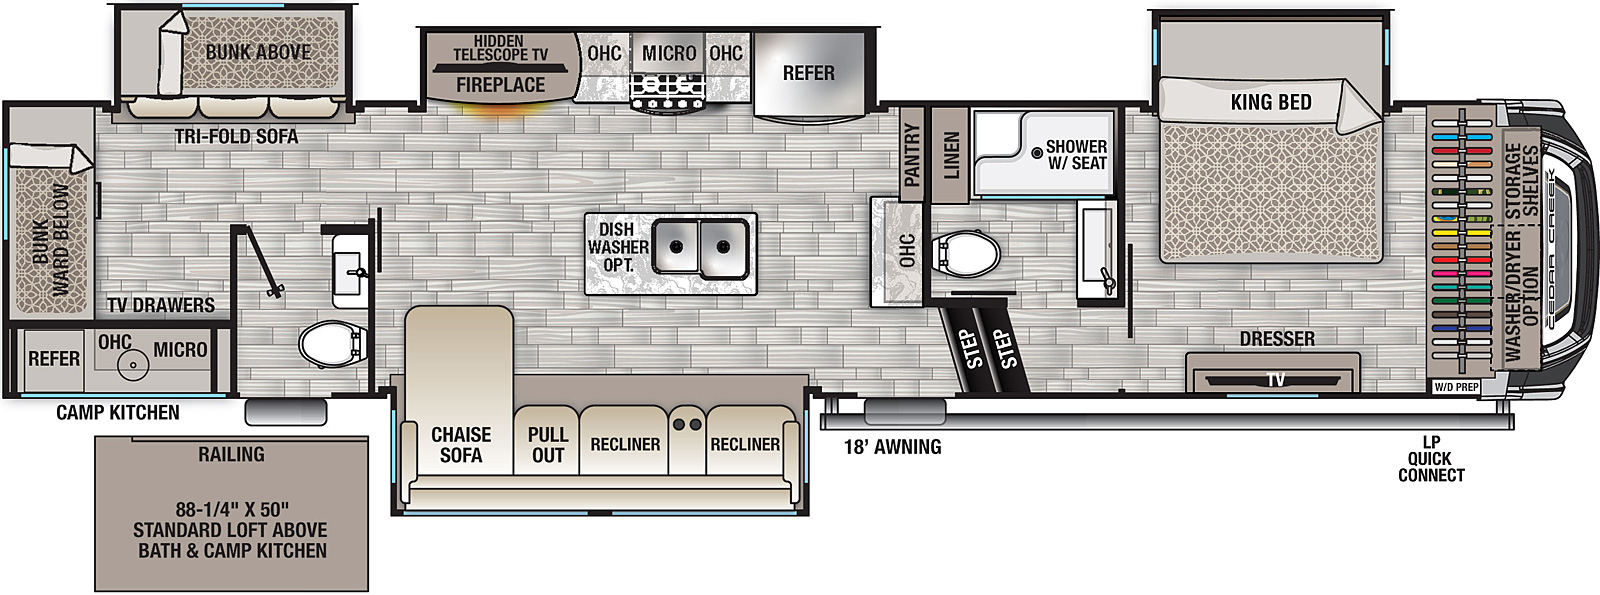 The 375BHO has 4 slide outs, 3 on the off-door side and 1 on the door side and 2 entry doors. Exterior features include a camp kitchen under the bunk on the door side, and 18 foot awning and an LP quick connect. Interior layout from front to back: front bedroom with king bed in a off-door side slide out, dresser and TV across from bed, front wall closet with storage shelves, washer/dyer option and washer/dryer prep; off-door side side aisle bathroom in the upper deck with toilet, shower w/seat, sink and linen storage; kitchen/living area with rear facing pantry and overhead cabinet; off-door side slide out holding hidden telescope TV and fireplace, overhead microwave, stovetop, overhead cabinets and refrigerator; kitchen island with double basin sink and optional dish washer; door side slide out with chaise sofa, pull out and 2 recliners; bunk house in rear with half bathroom that includes an exterior door, toilet and sink; bunk beds along door side and back wall, off-door side slide out holding a tri-fold sofa with fold-up bunk above.